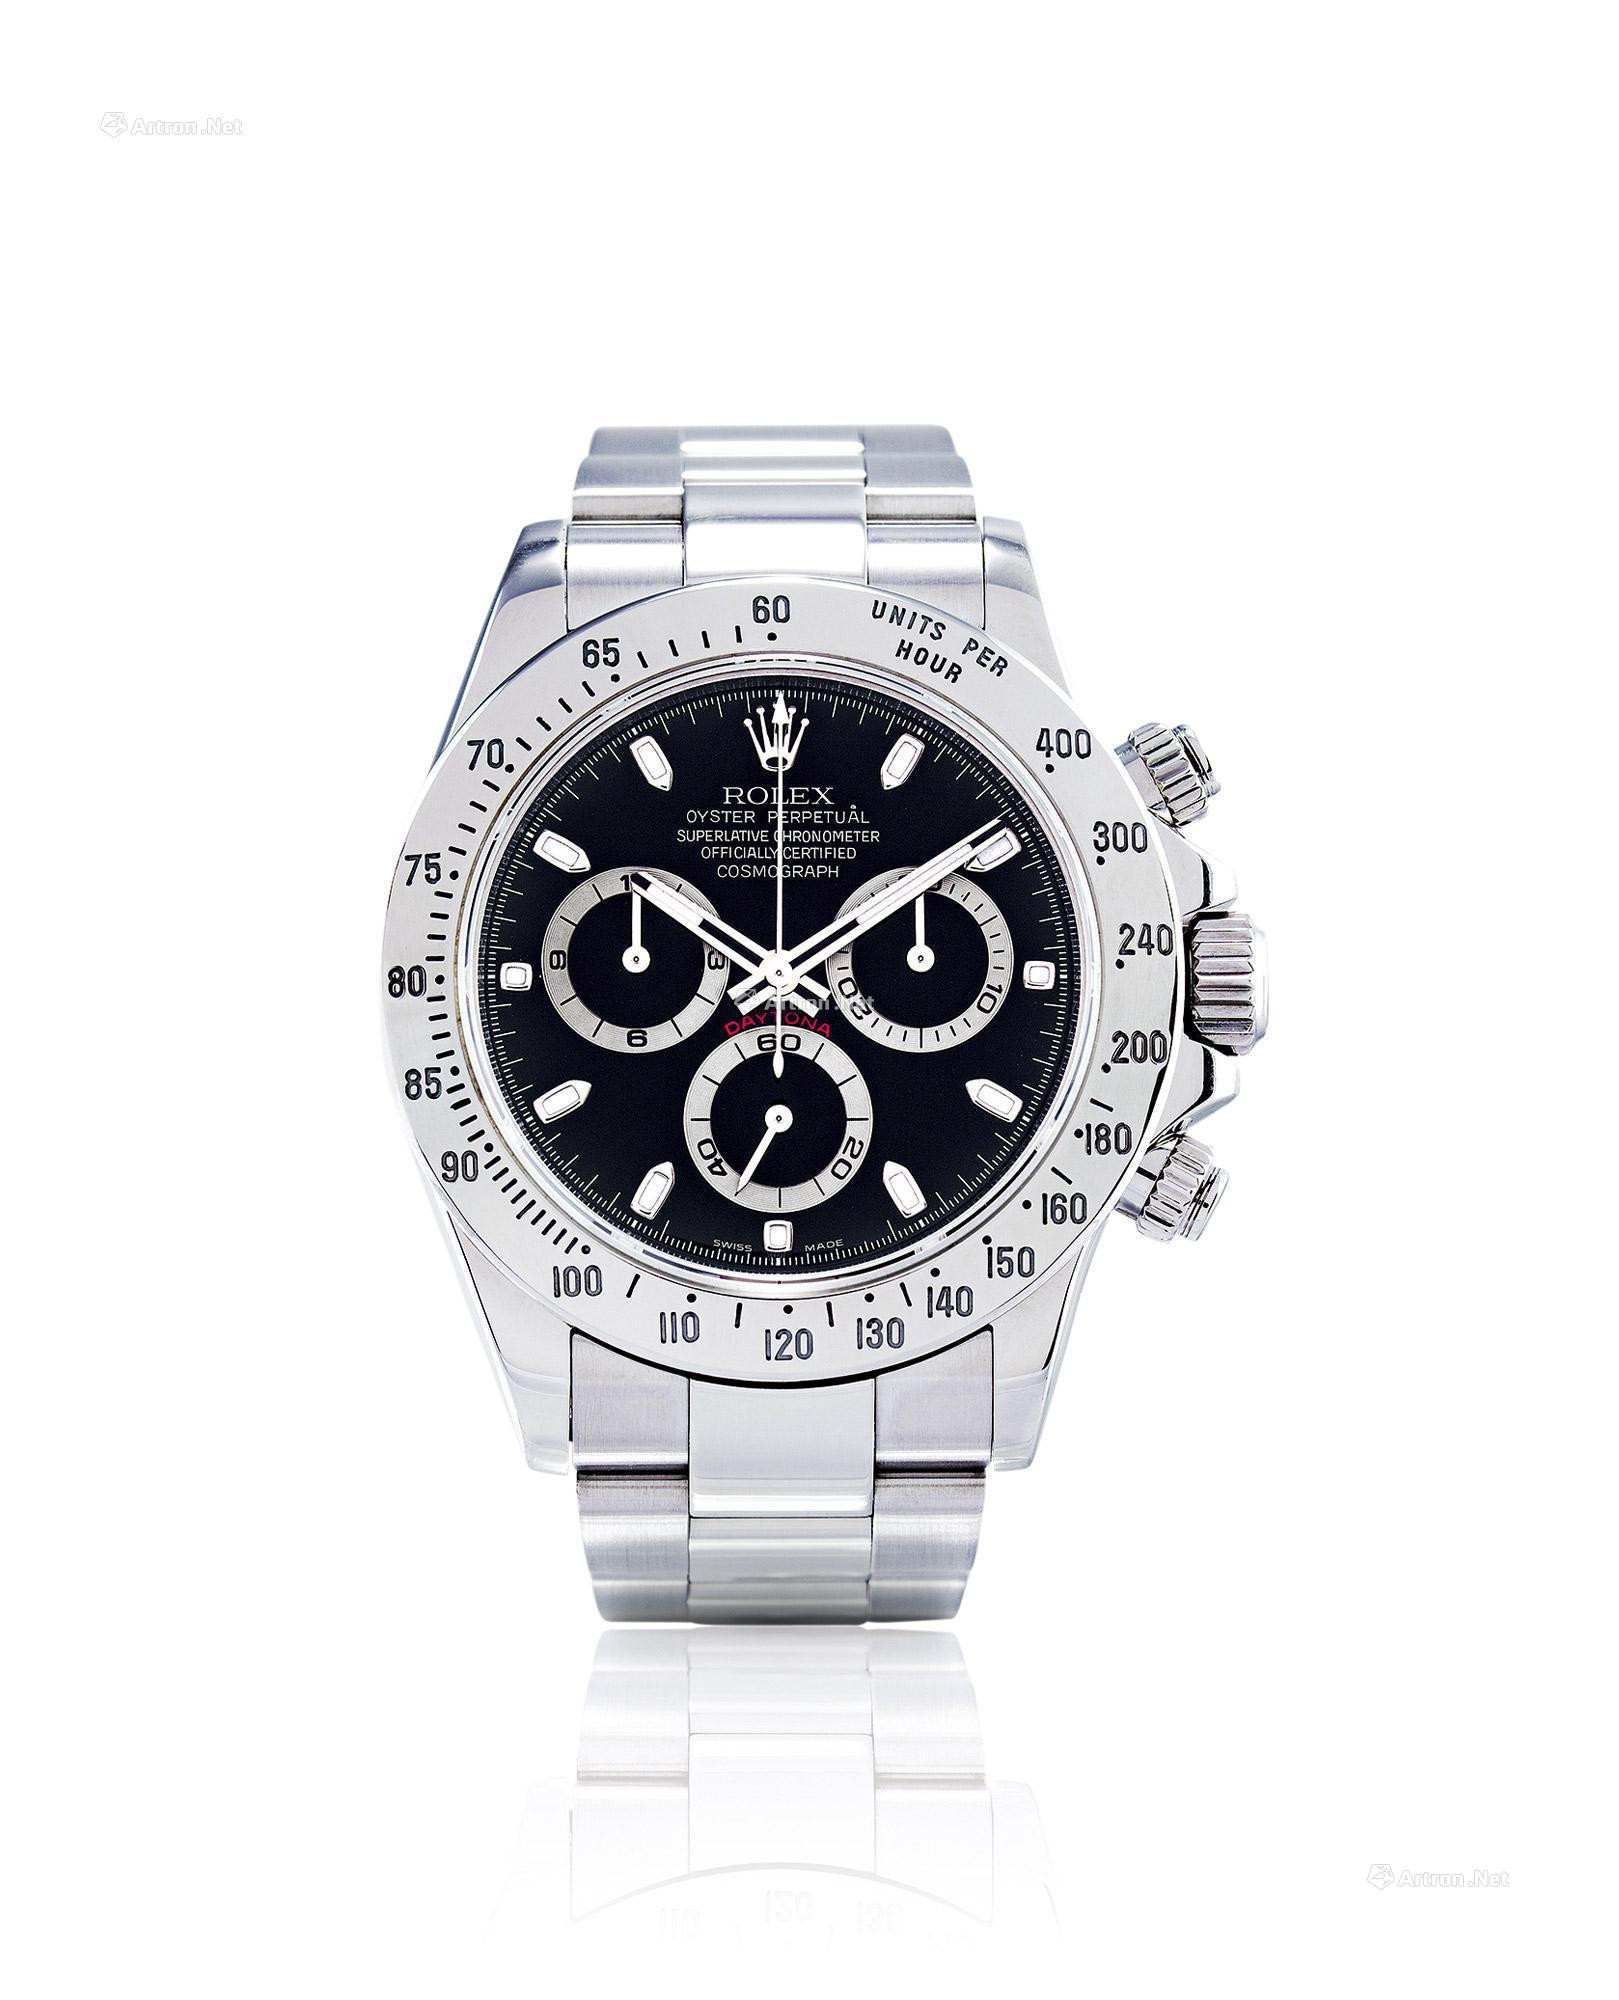 ROLEX  A FINE STAINLESS STEEL CHRONOGRAPH AUTOMATIC BRACELET WATCH， WITH SMALL SECONDS AND TACHYMETER